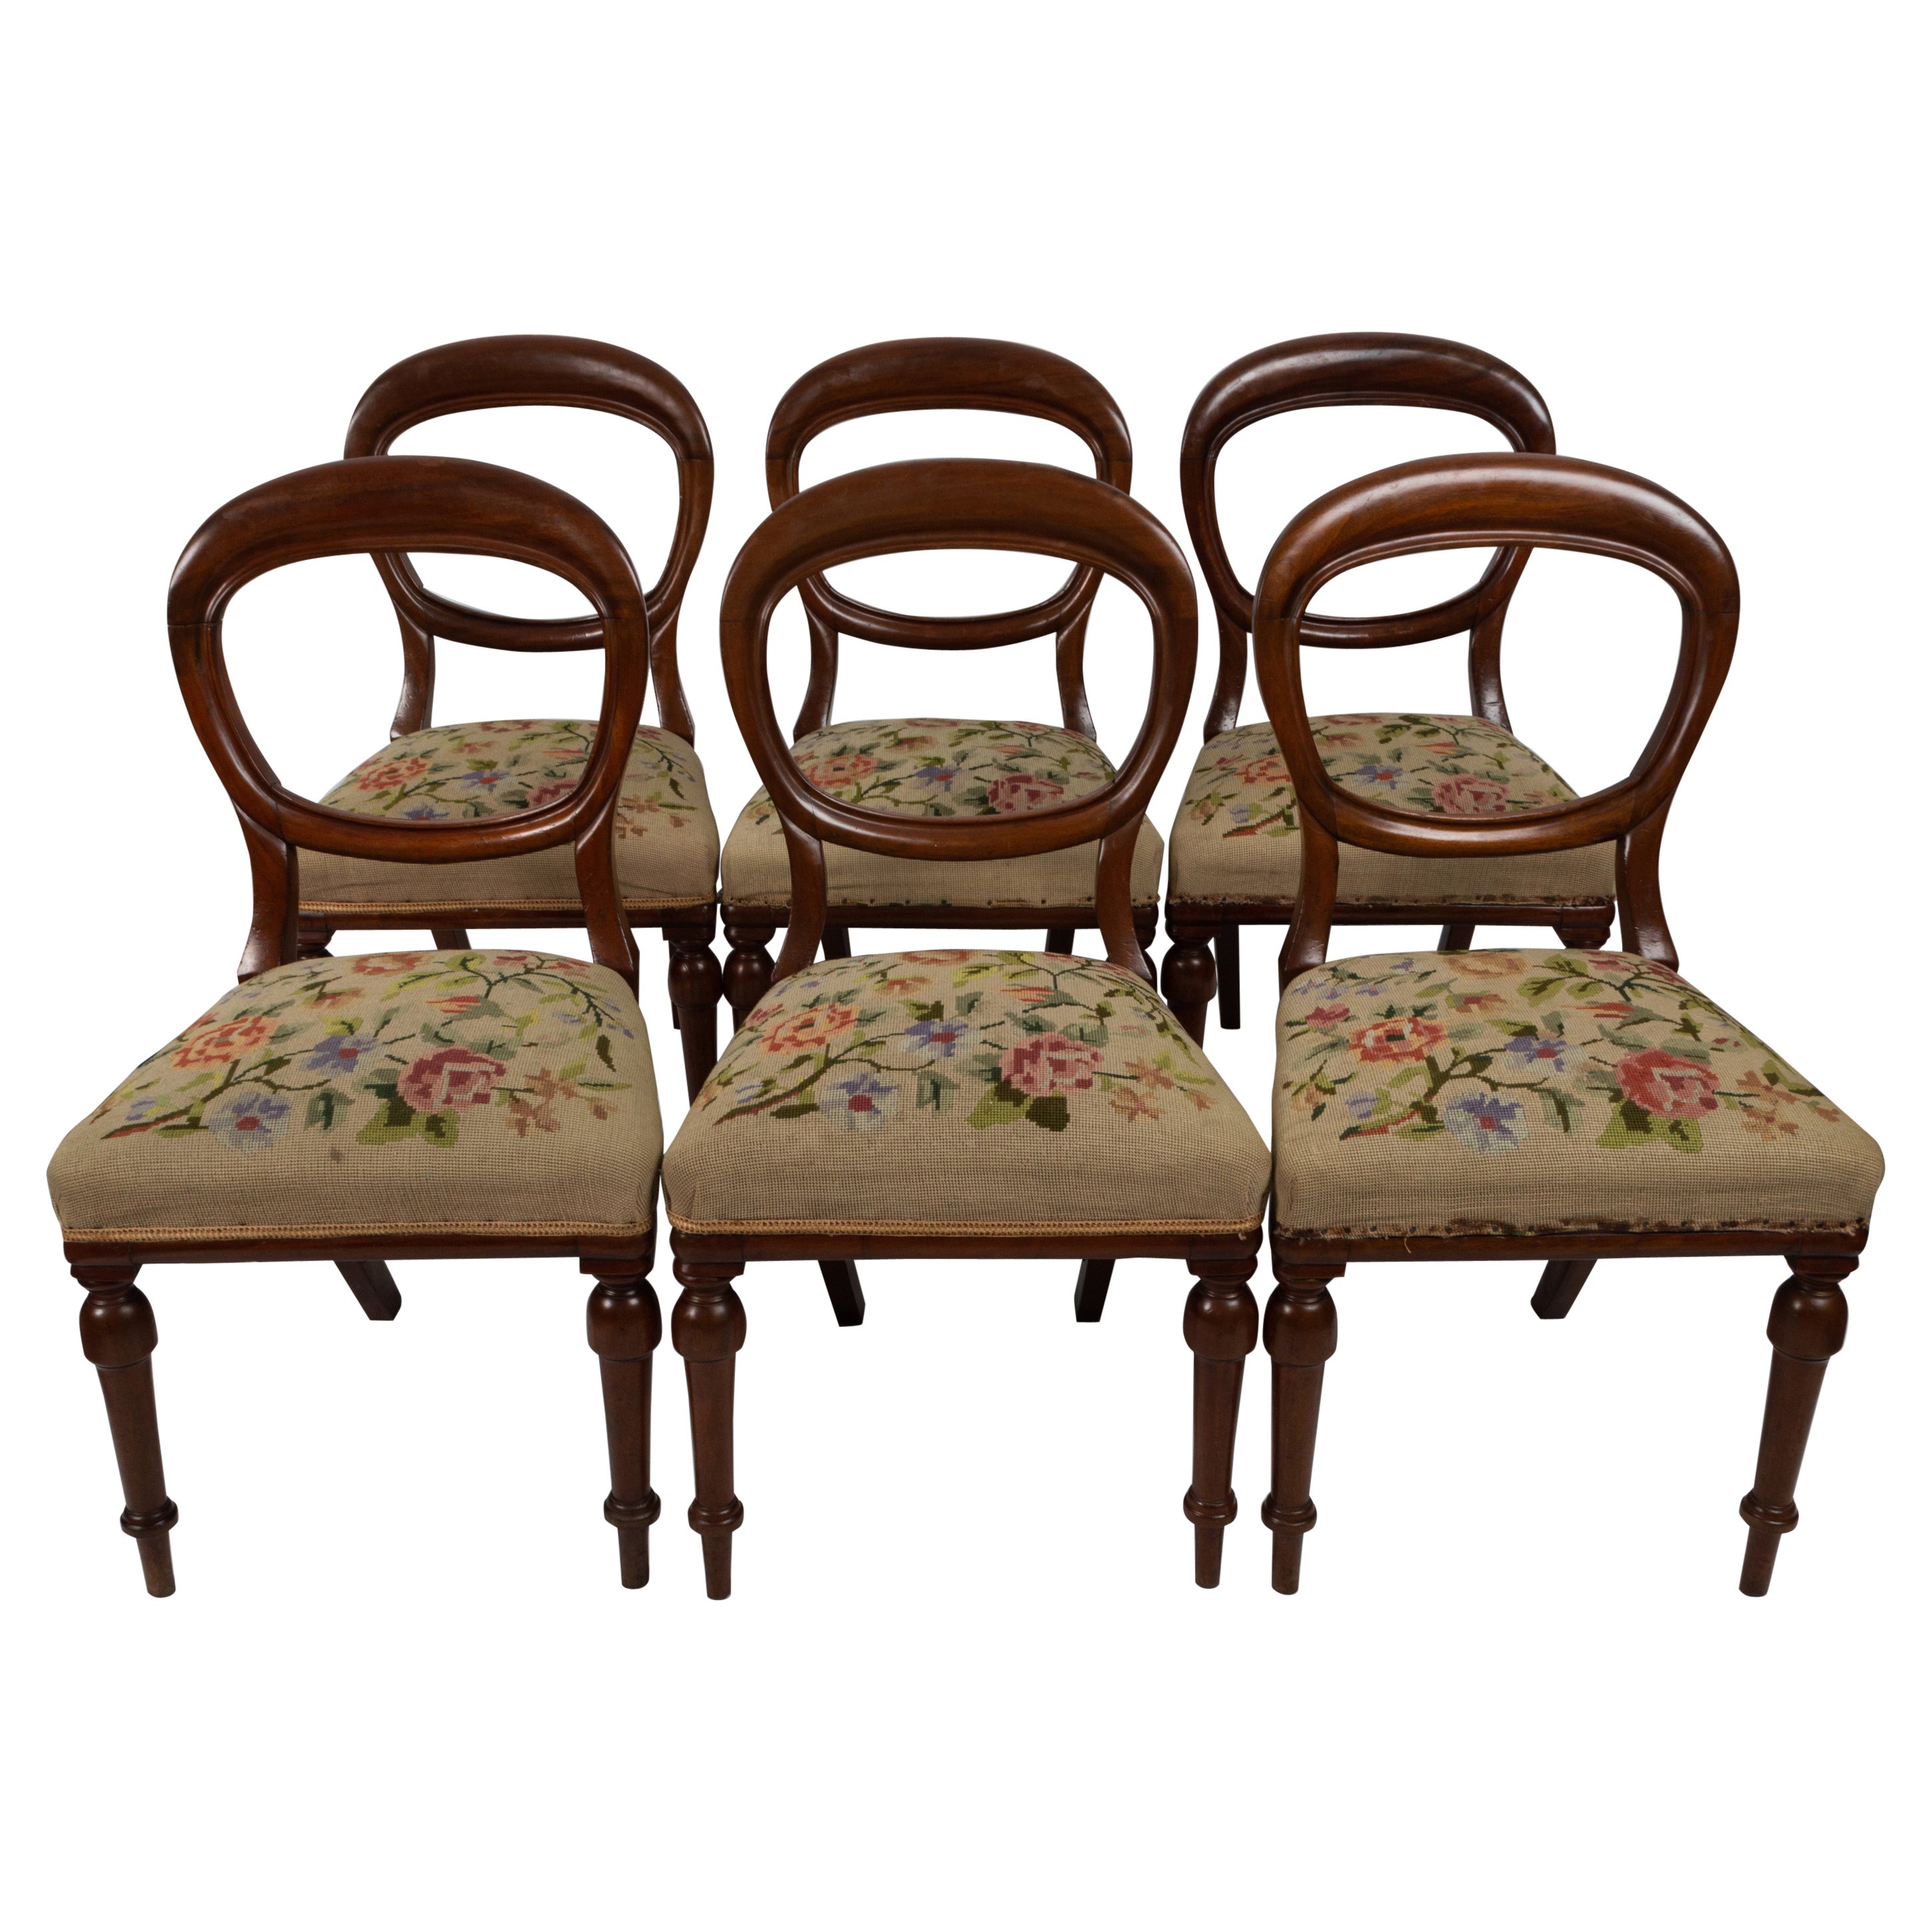 Set of Six Antique English 19th Century Mahogany Balloon Back Chairs circa 1860 For Sale